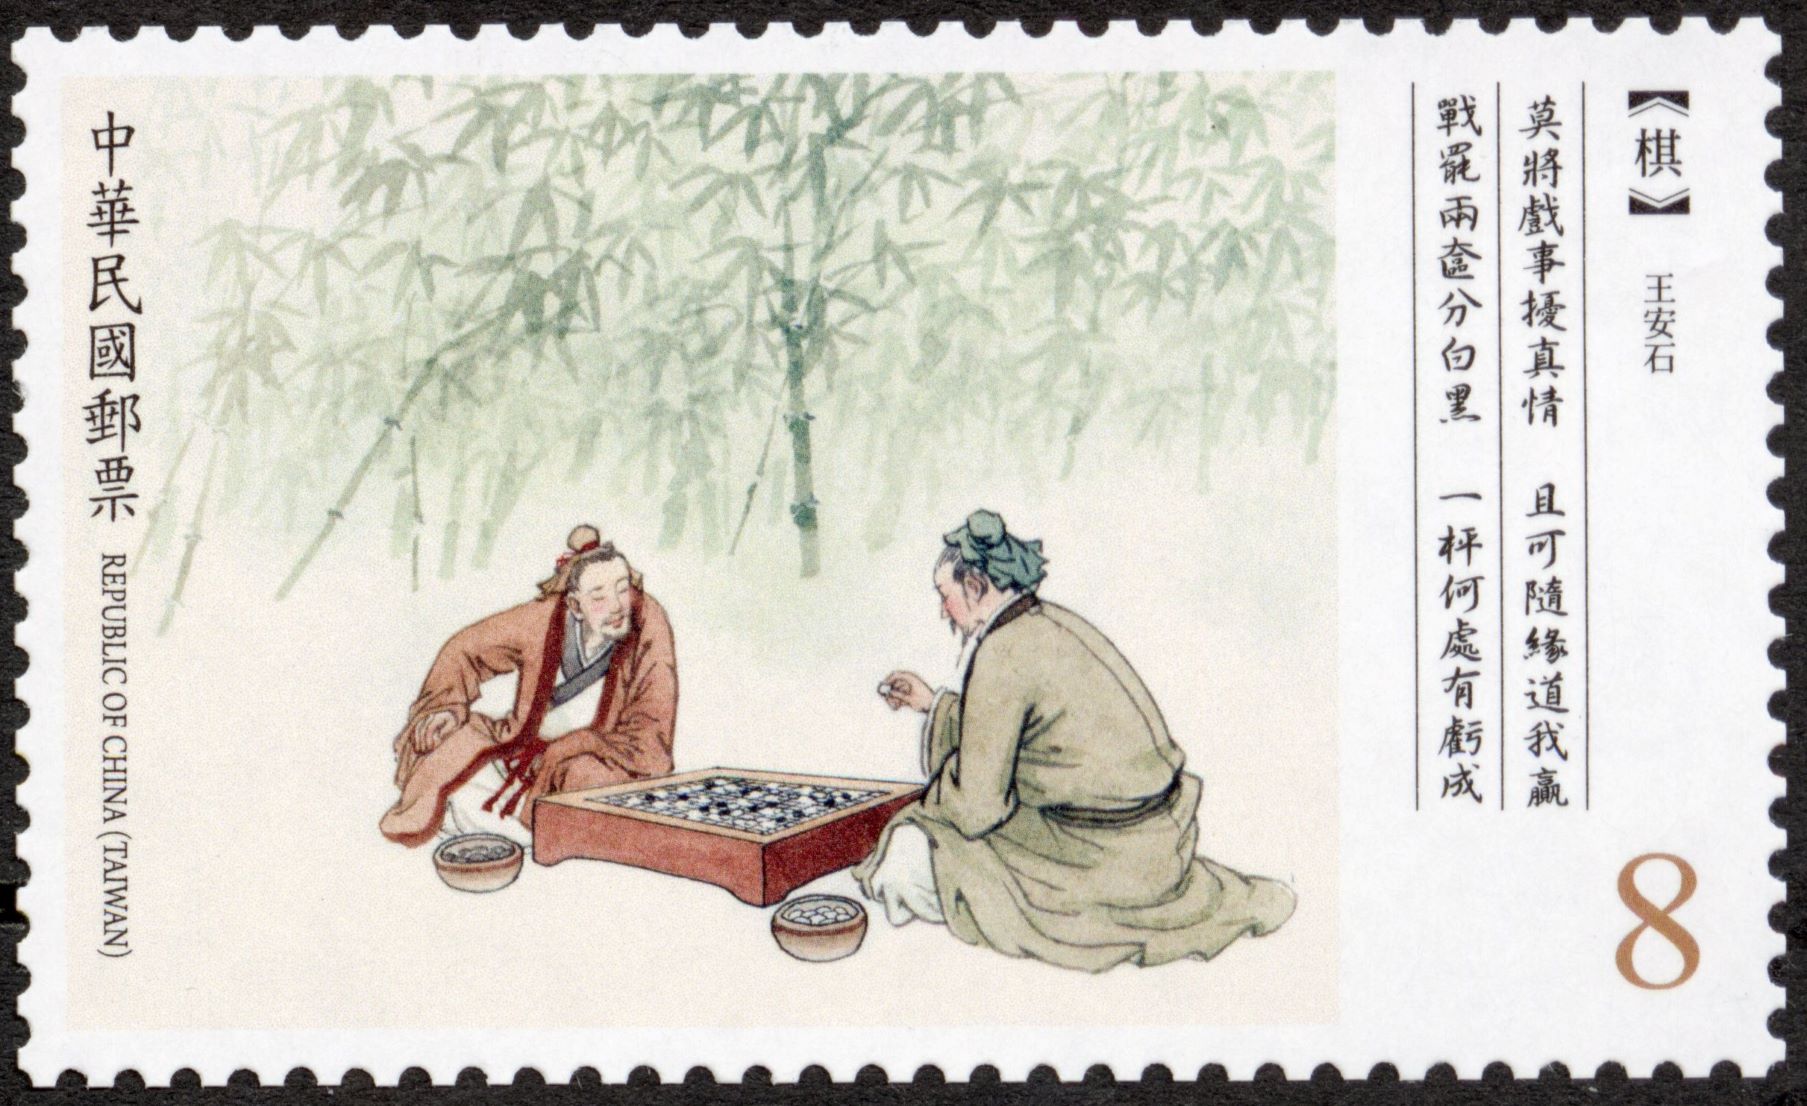 (Sp. 724.2)Sp.724 Classical Chinese Poetry Postage Stamps (Issue of 2022)